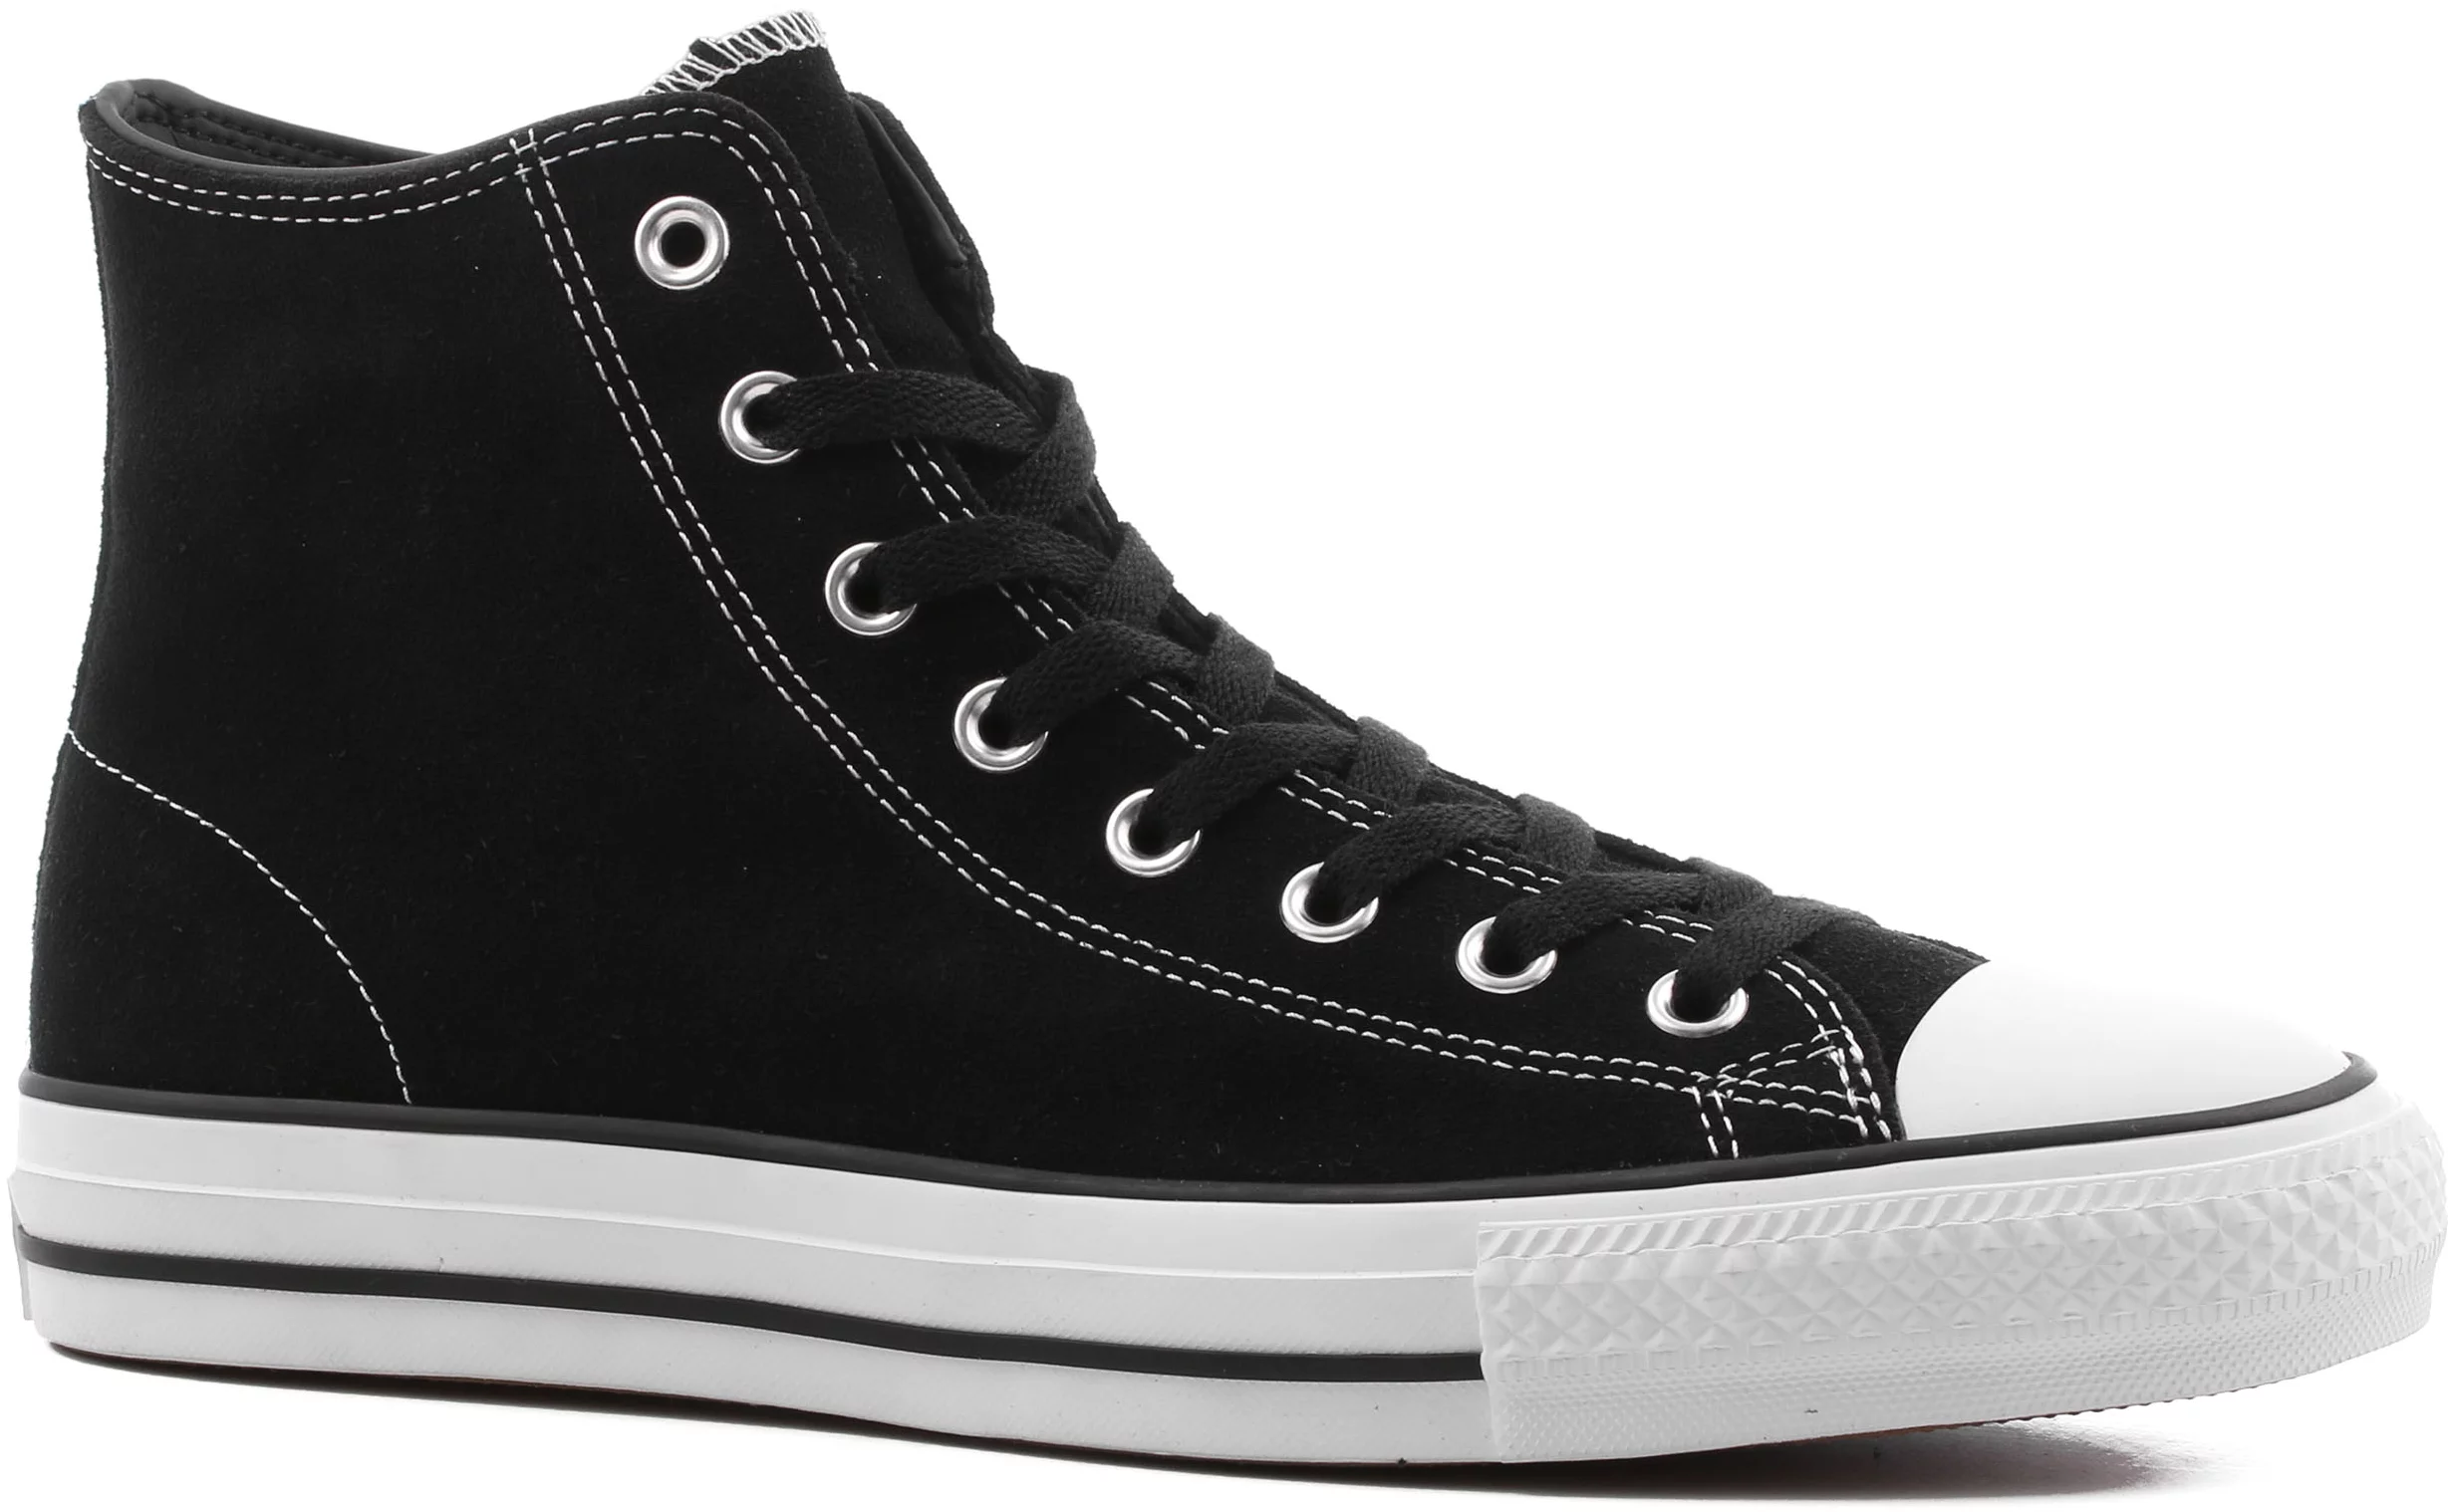 Converse Chuck Taylor All Star Pro High Skate Shoes - (suede